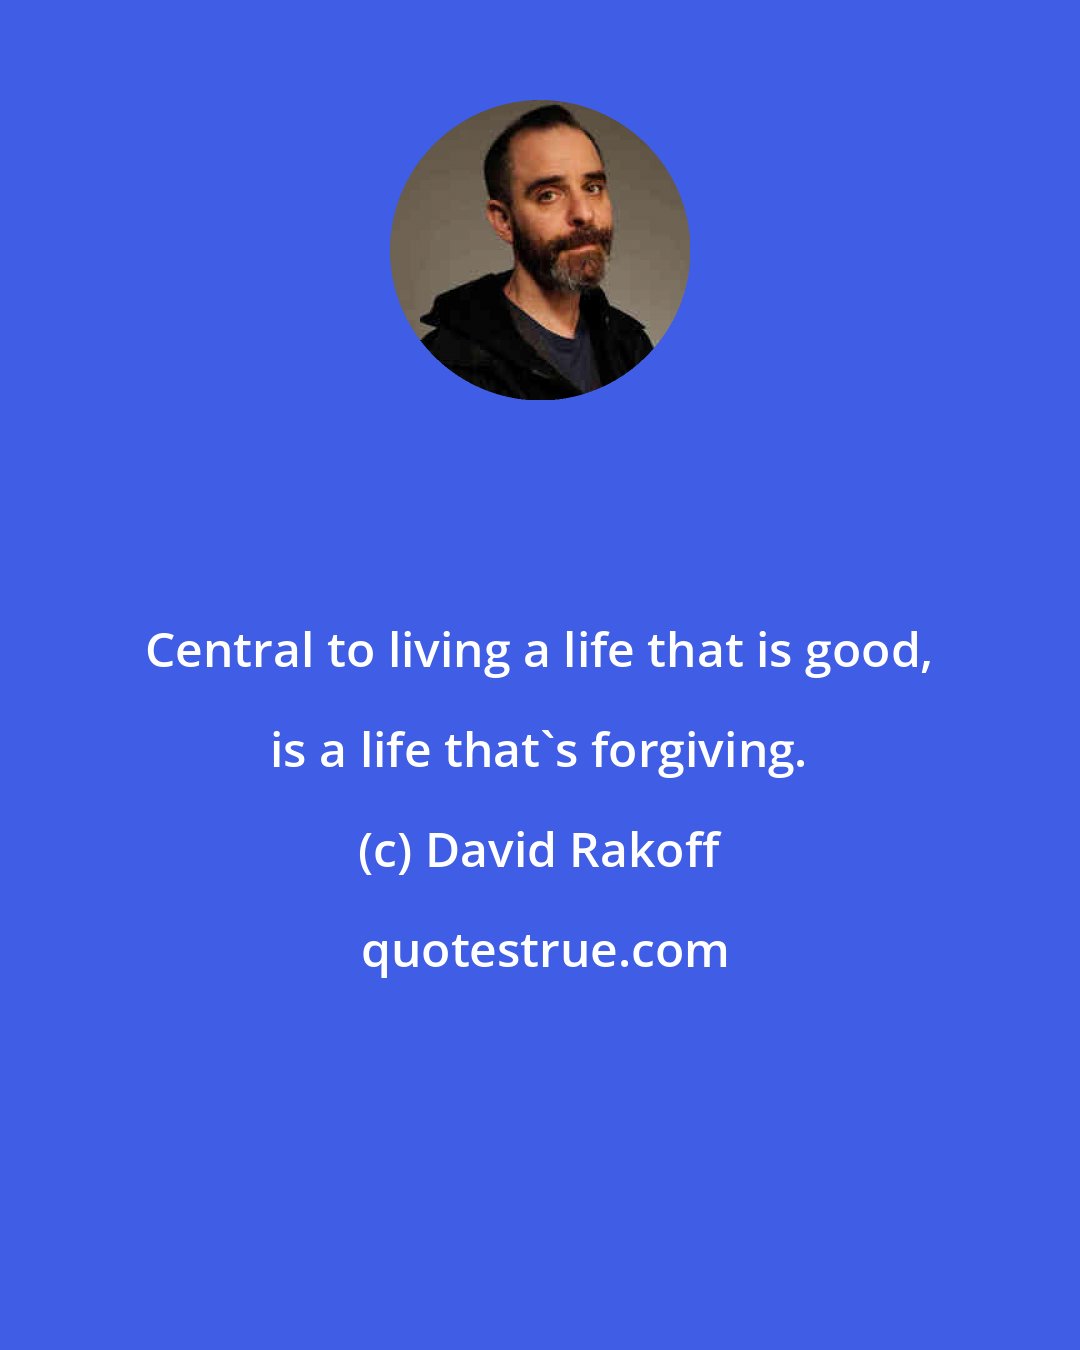 David Rakoff: Central to living a life that is good, is a life that's forgiving.